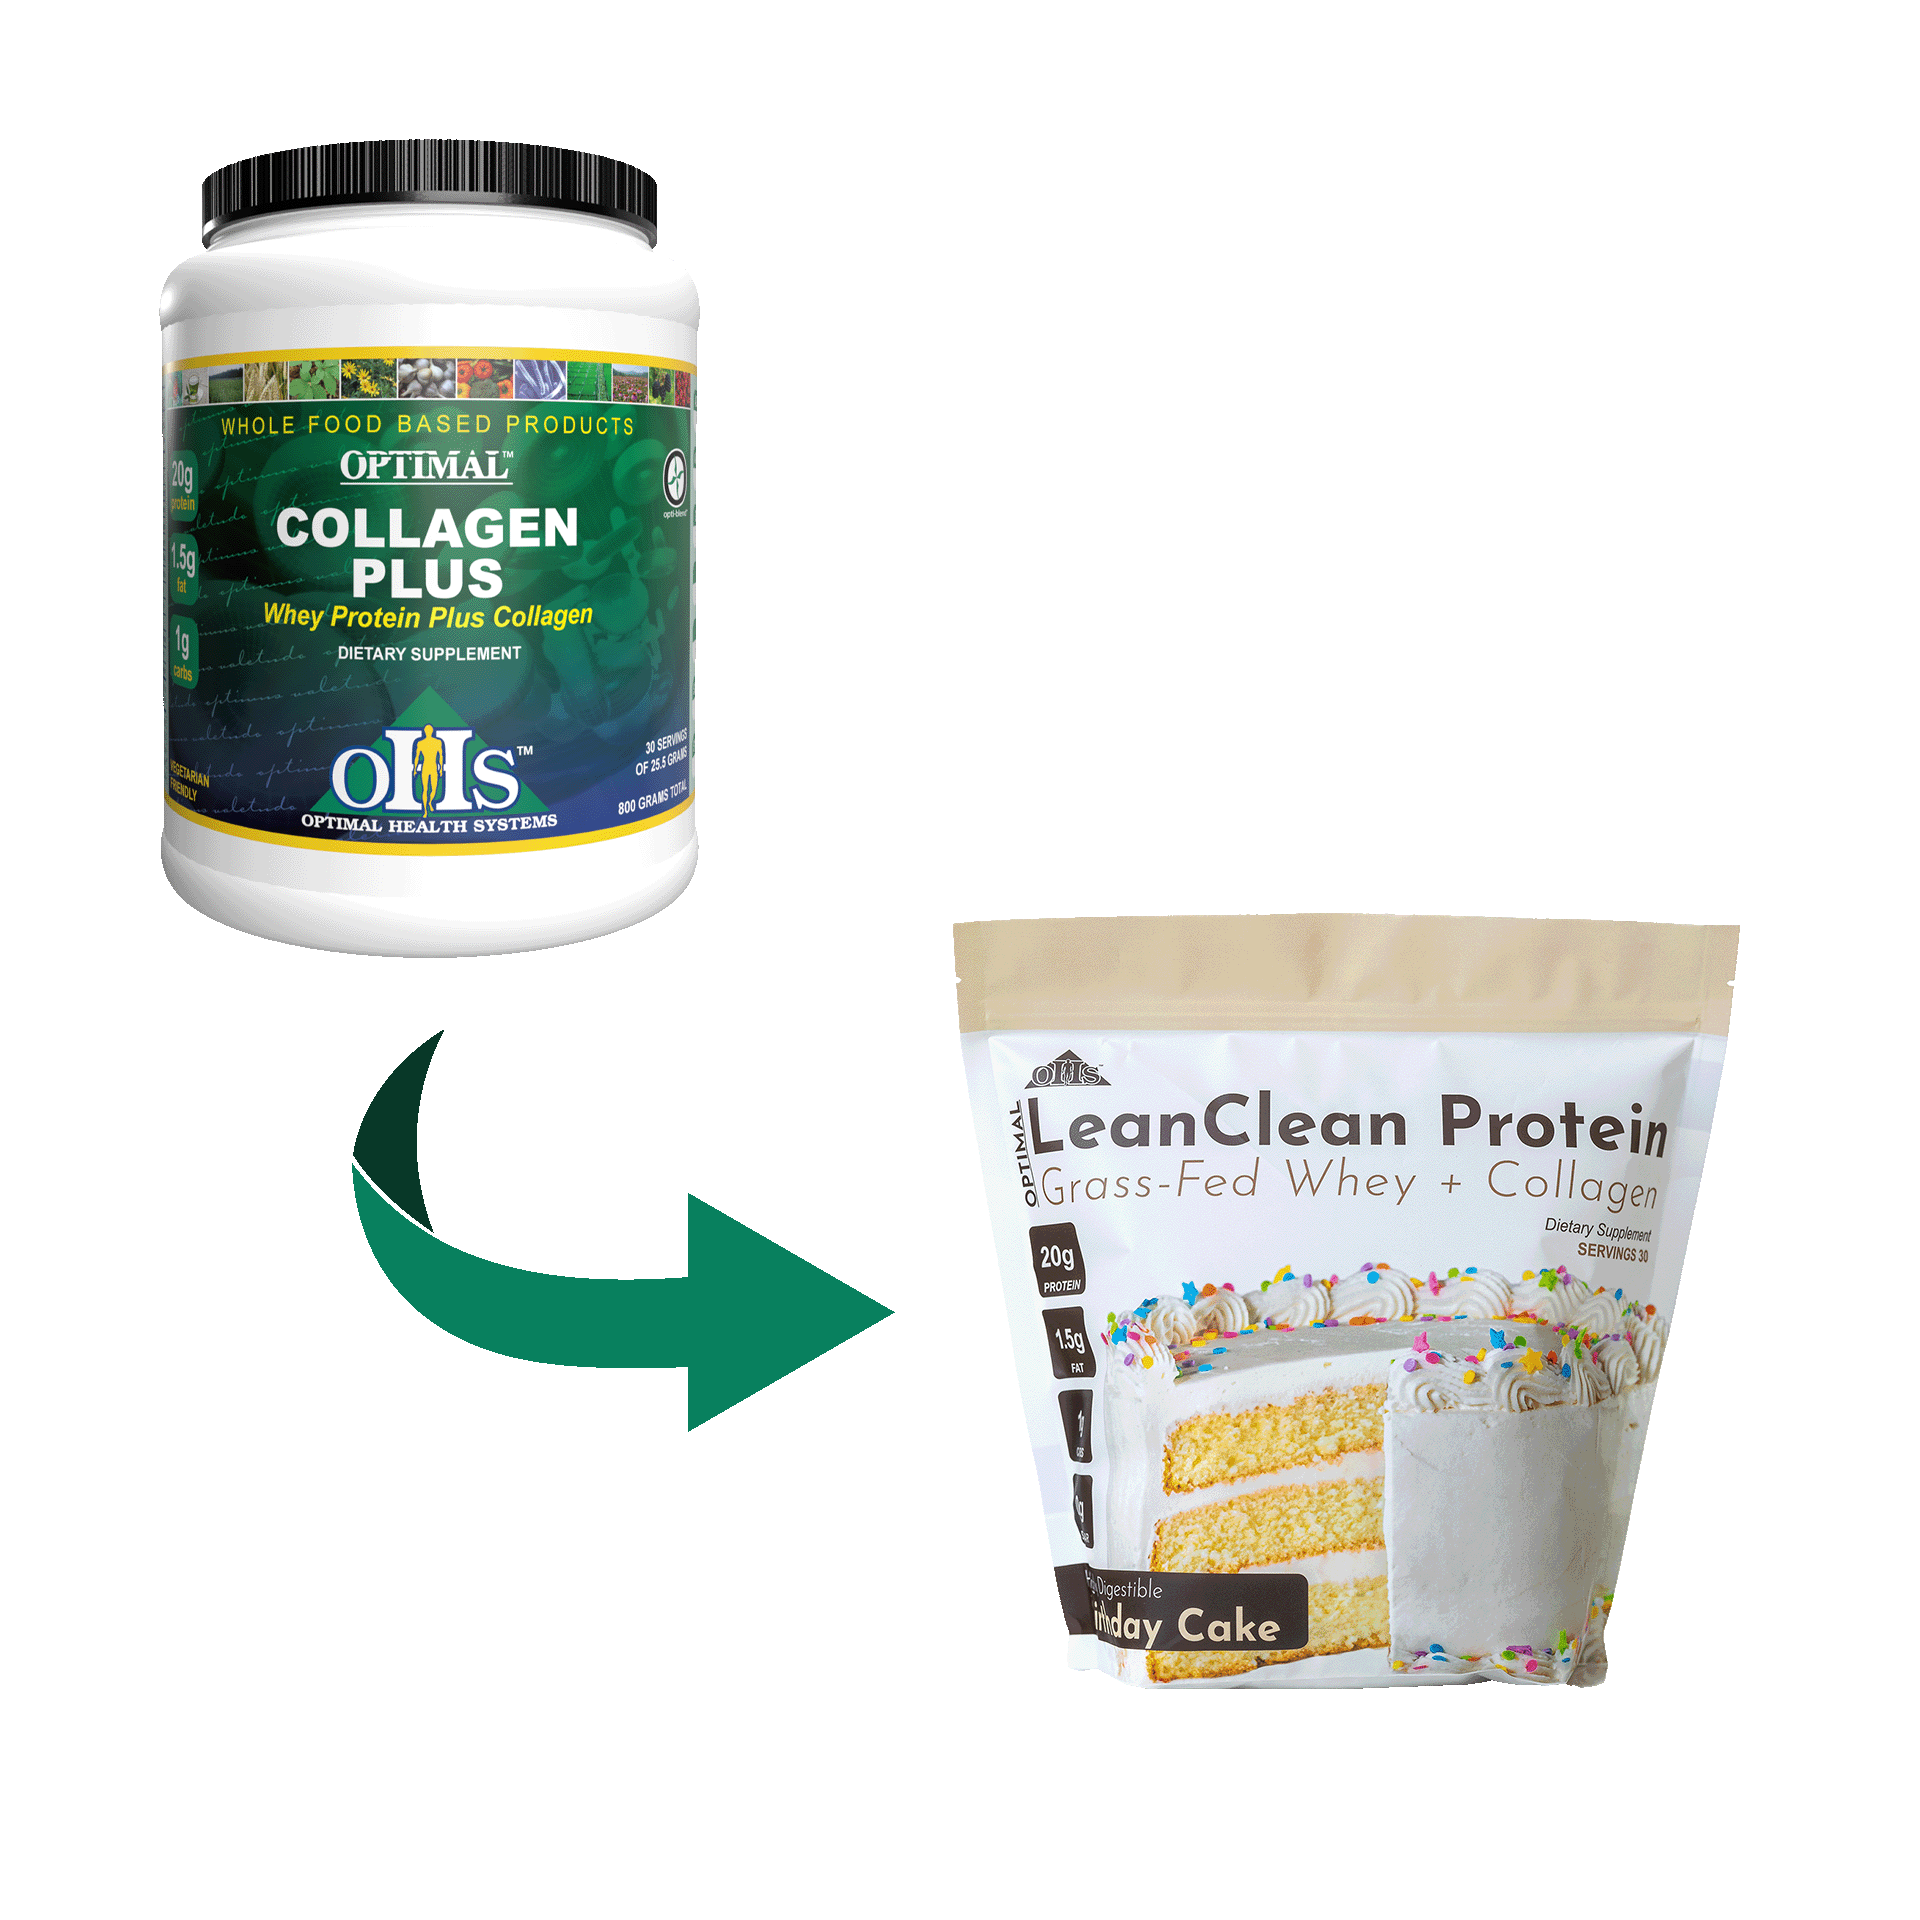 Image of a bottle of Collagen Plus with a green arrow pointing to its new bag design called Lean Clean Protein Birthday Cake.